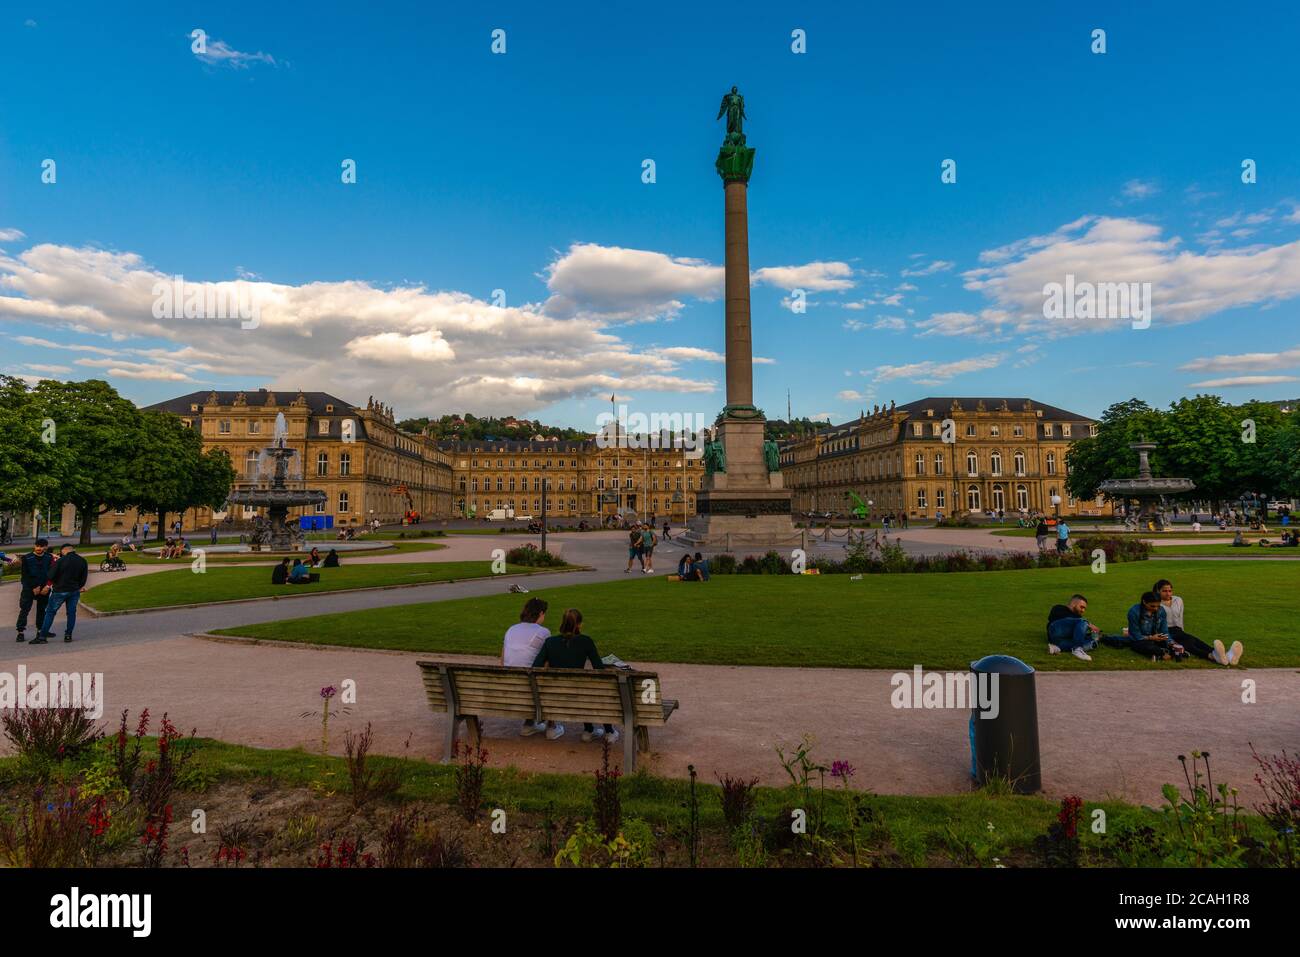 Neues Schloss or New Palace at Schlossplatz or Castle Square in the inner  city , Stuttgart, Federal State Baden-Württemberg, South Germany, Europe Stock Photo